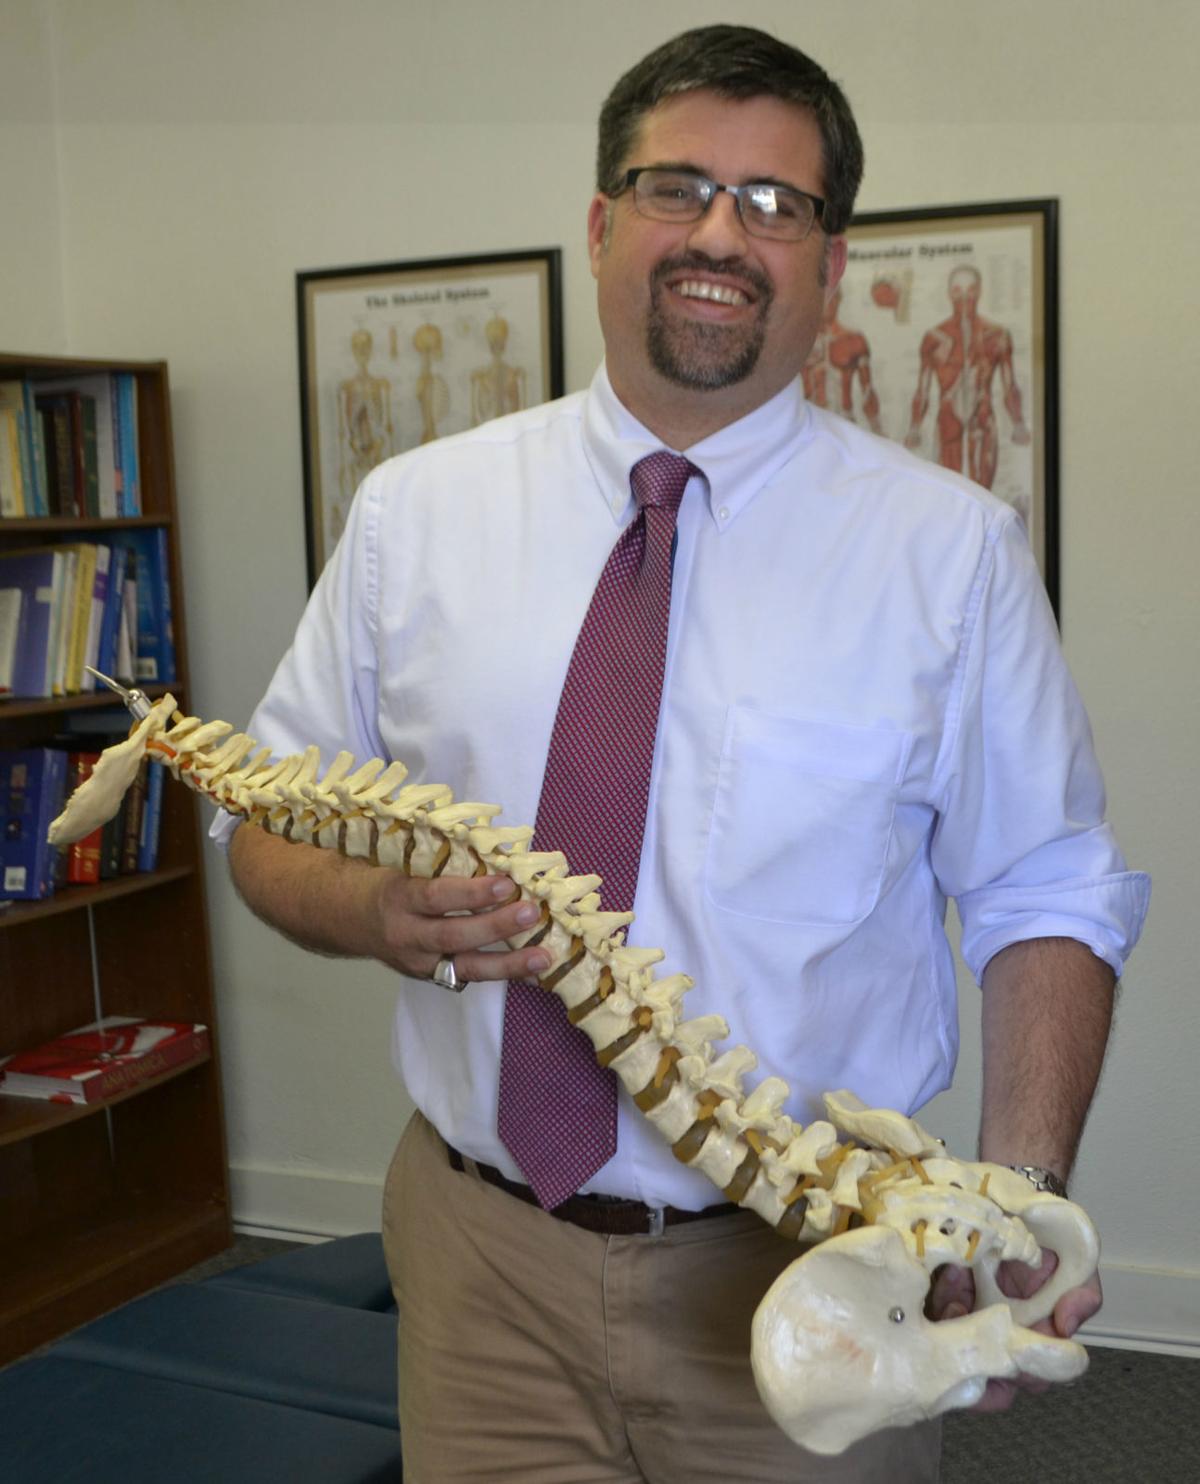 Affordable Chiropractic Care strives for convenience | News ...